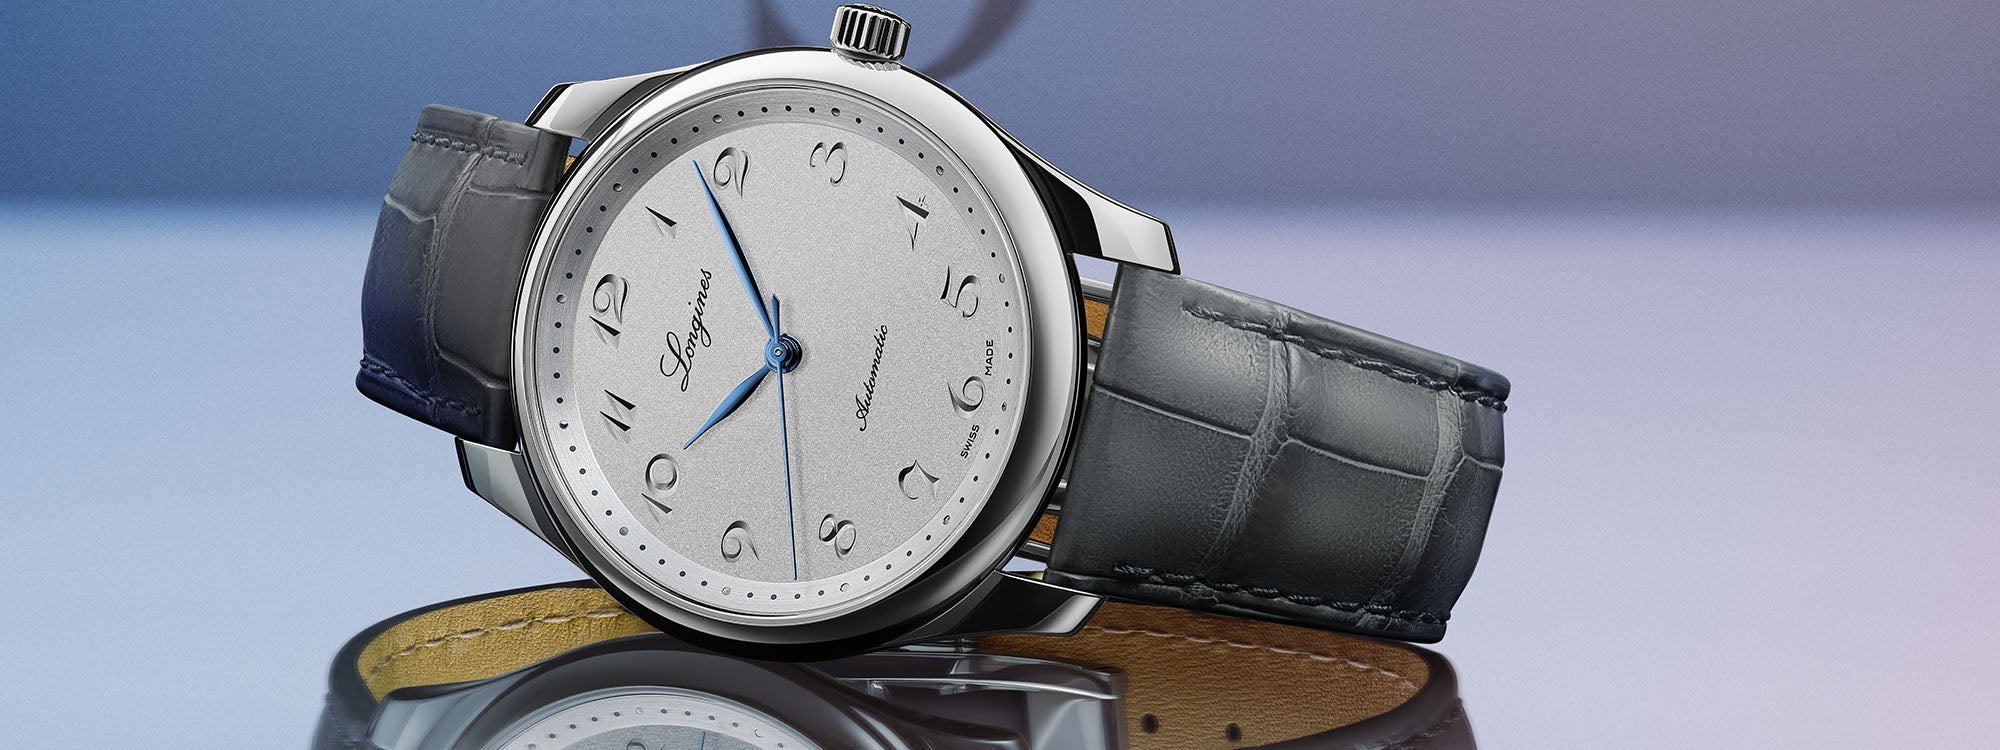 Longines Watch Review and Complete History: The Master Collection Marks 190 Years